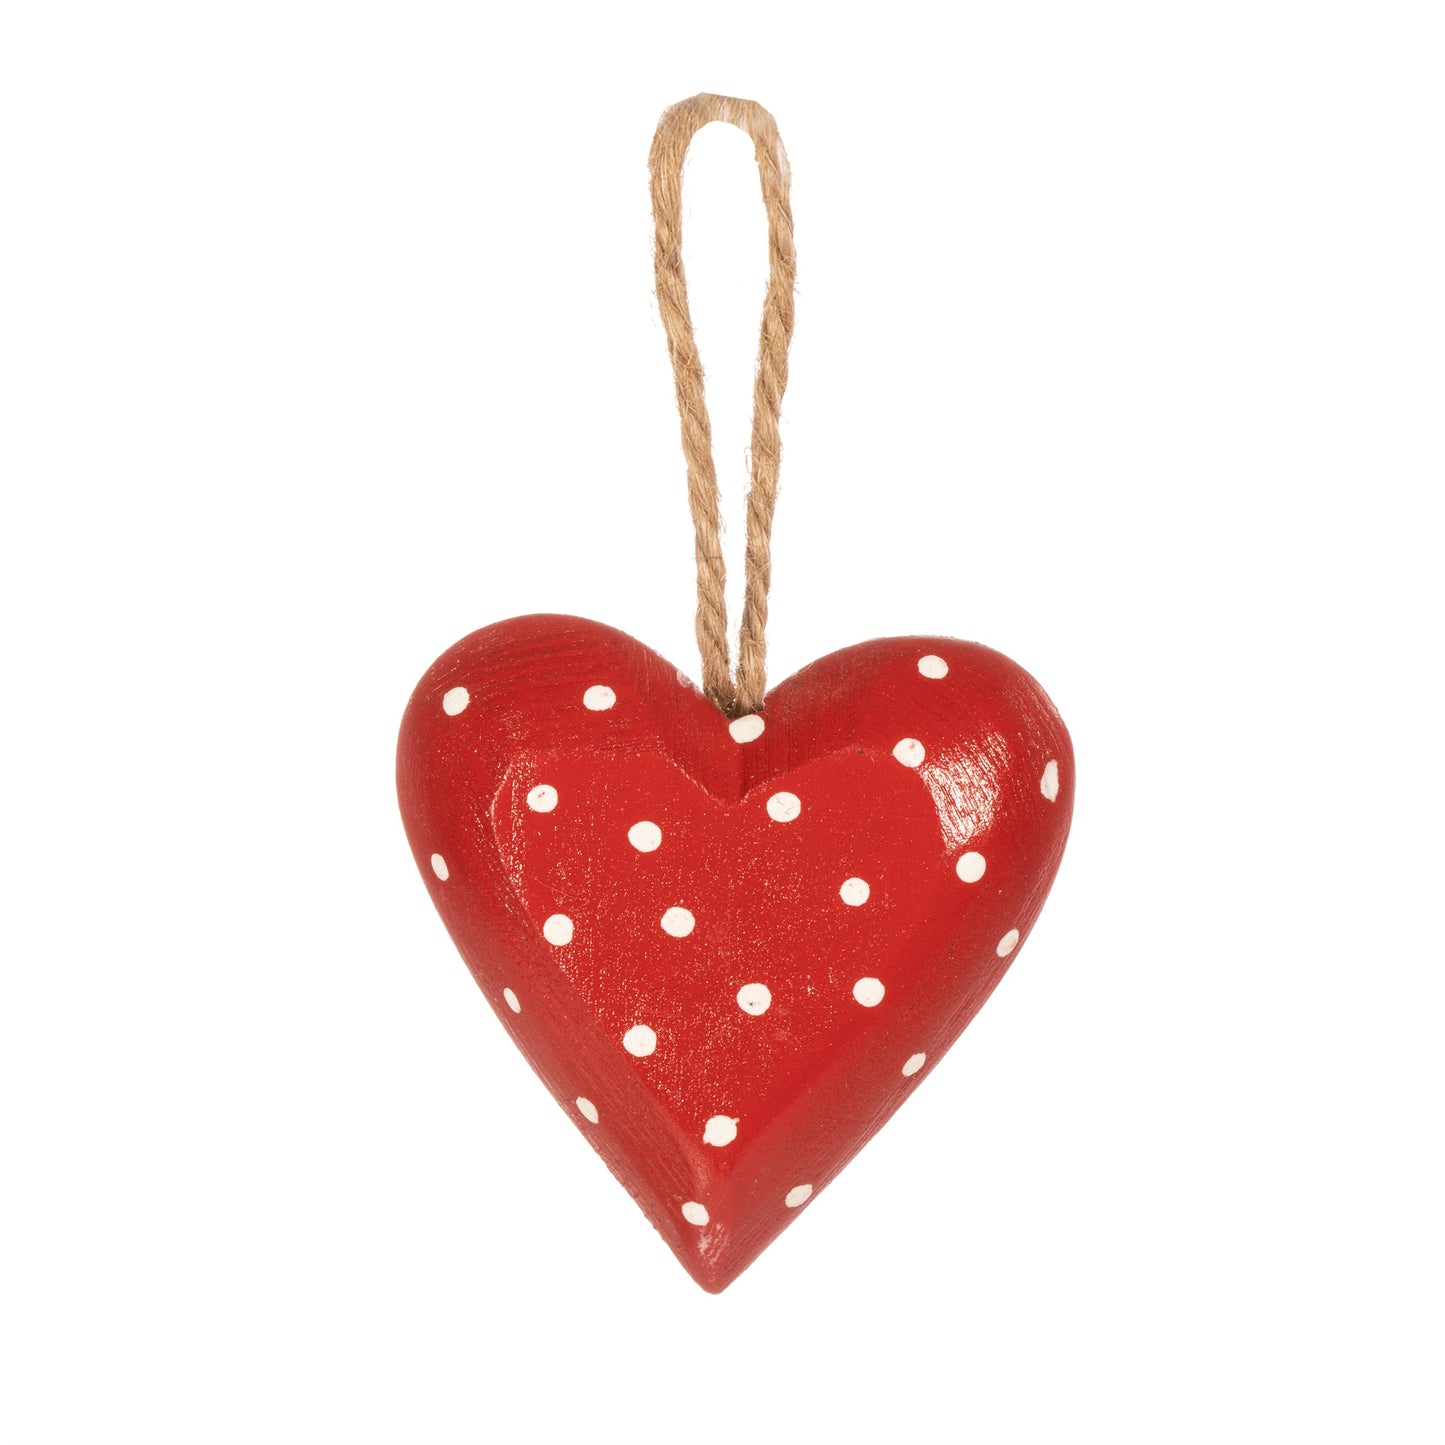 Red Wooden Heart with White Polka Dots Christmas Decoration